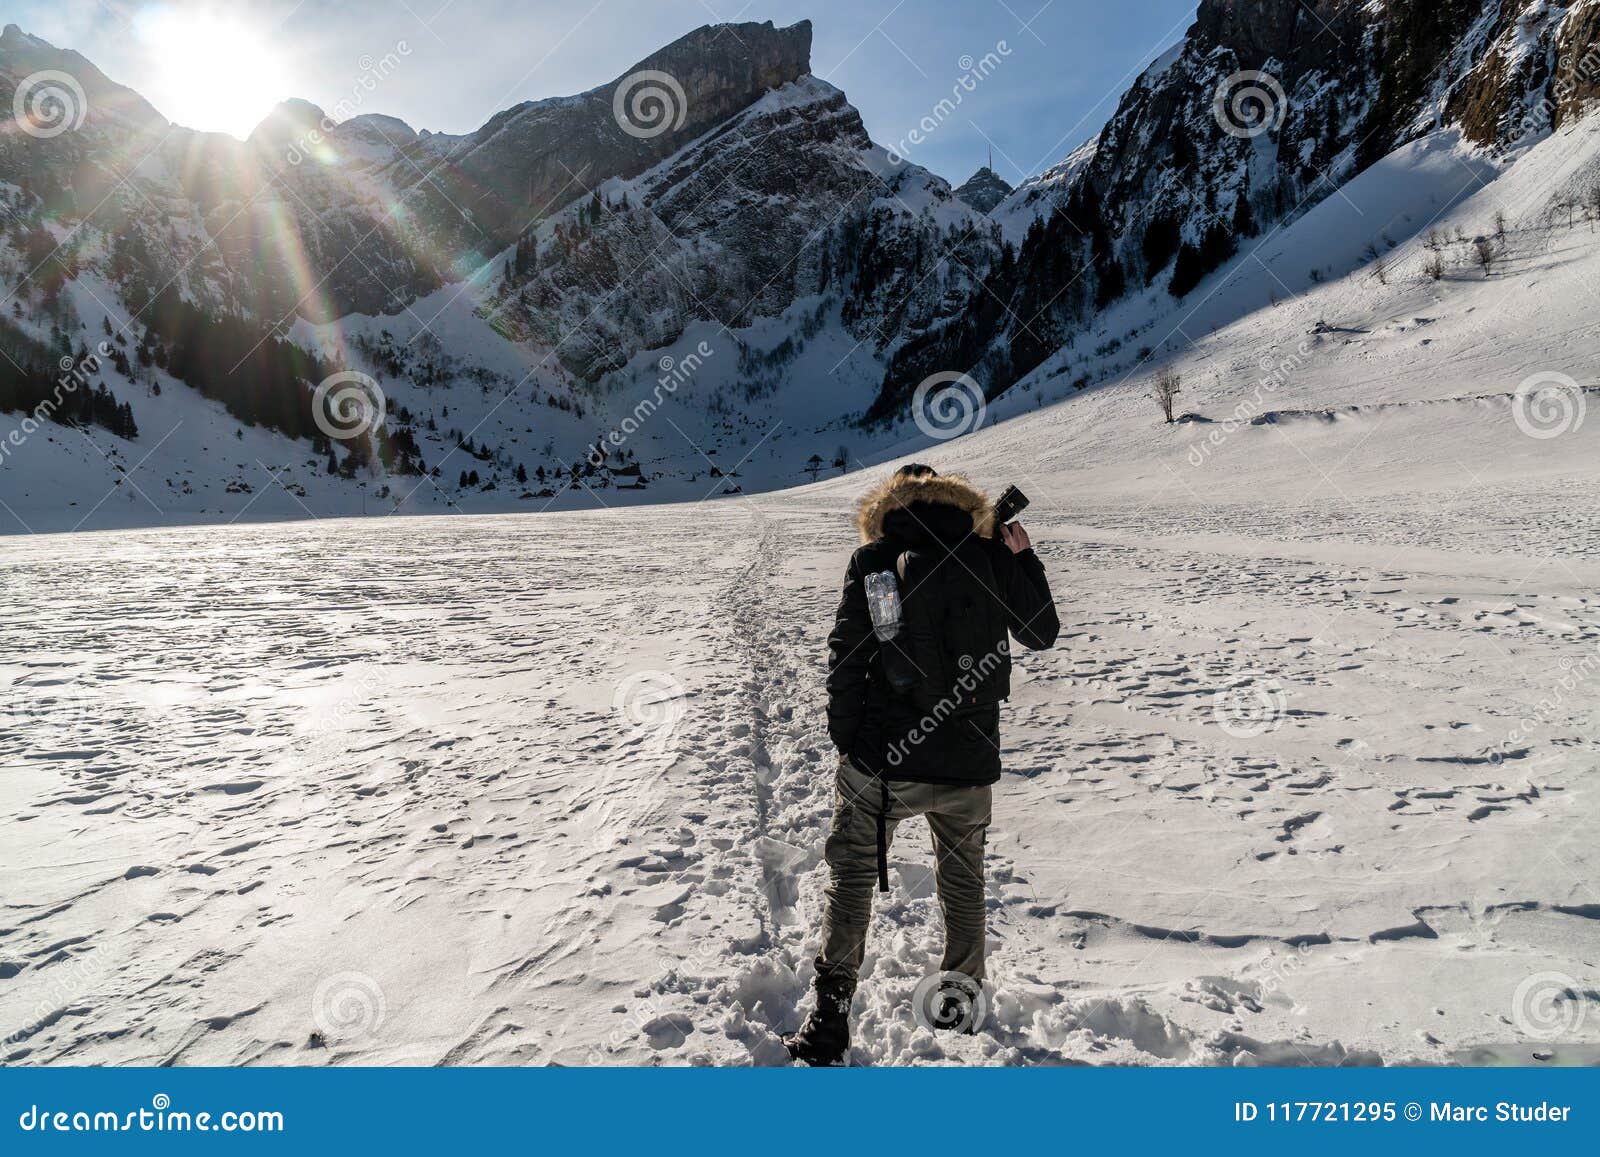 Hiking Over Frozen Lake With Small Village Swiss Mountains Editorial